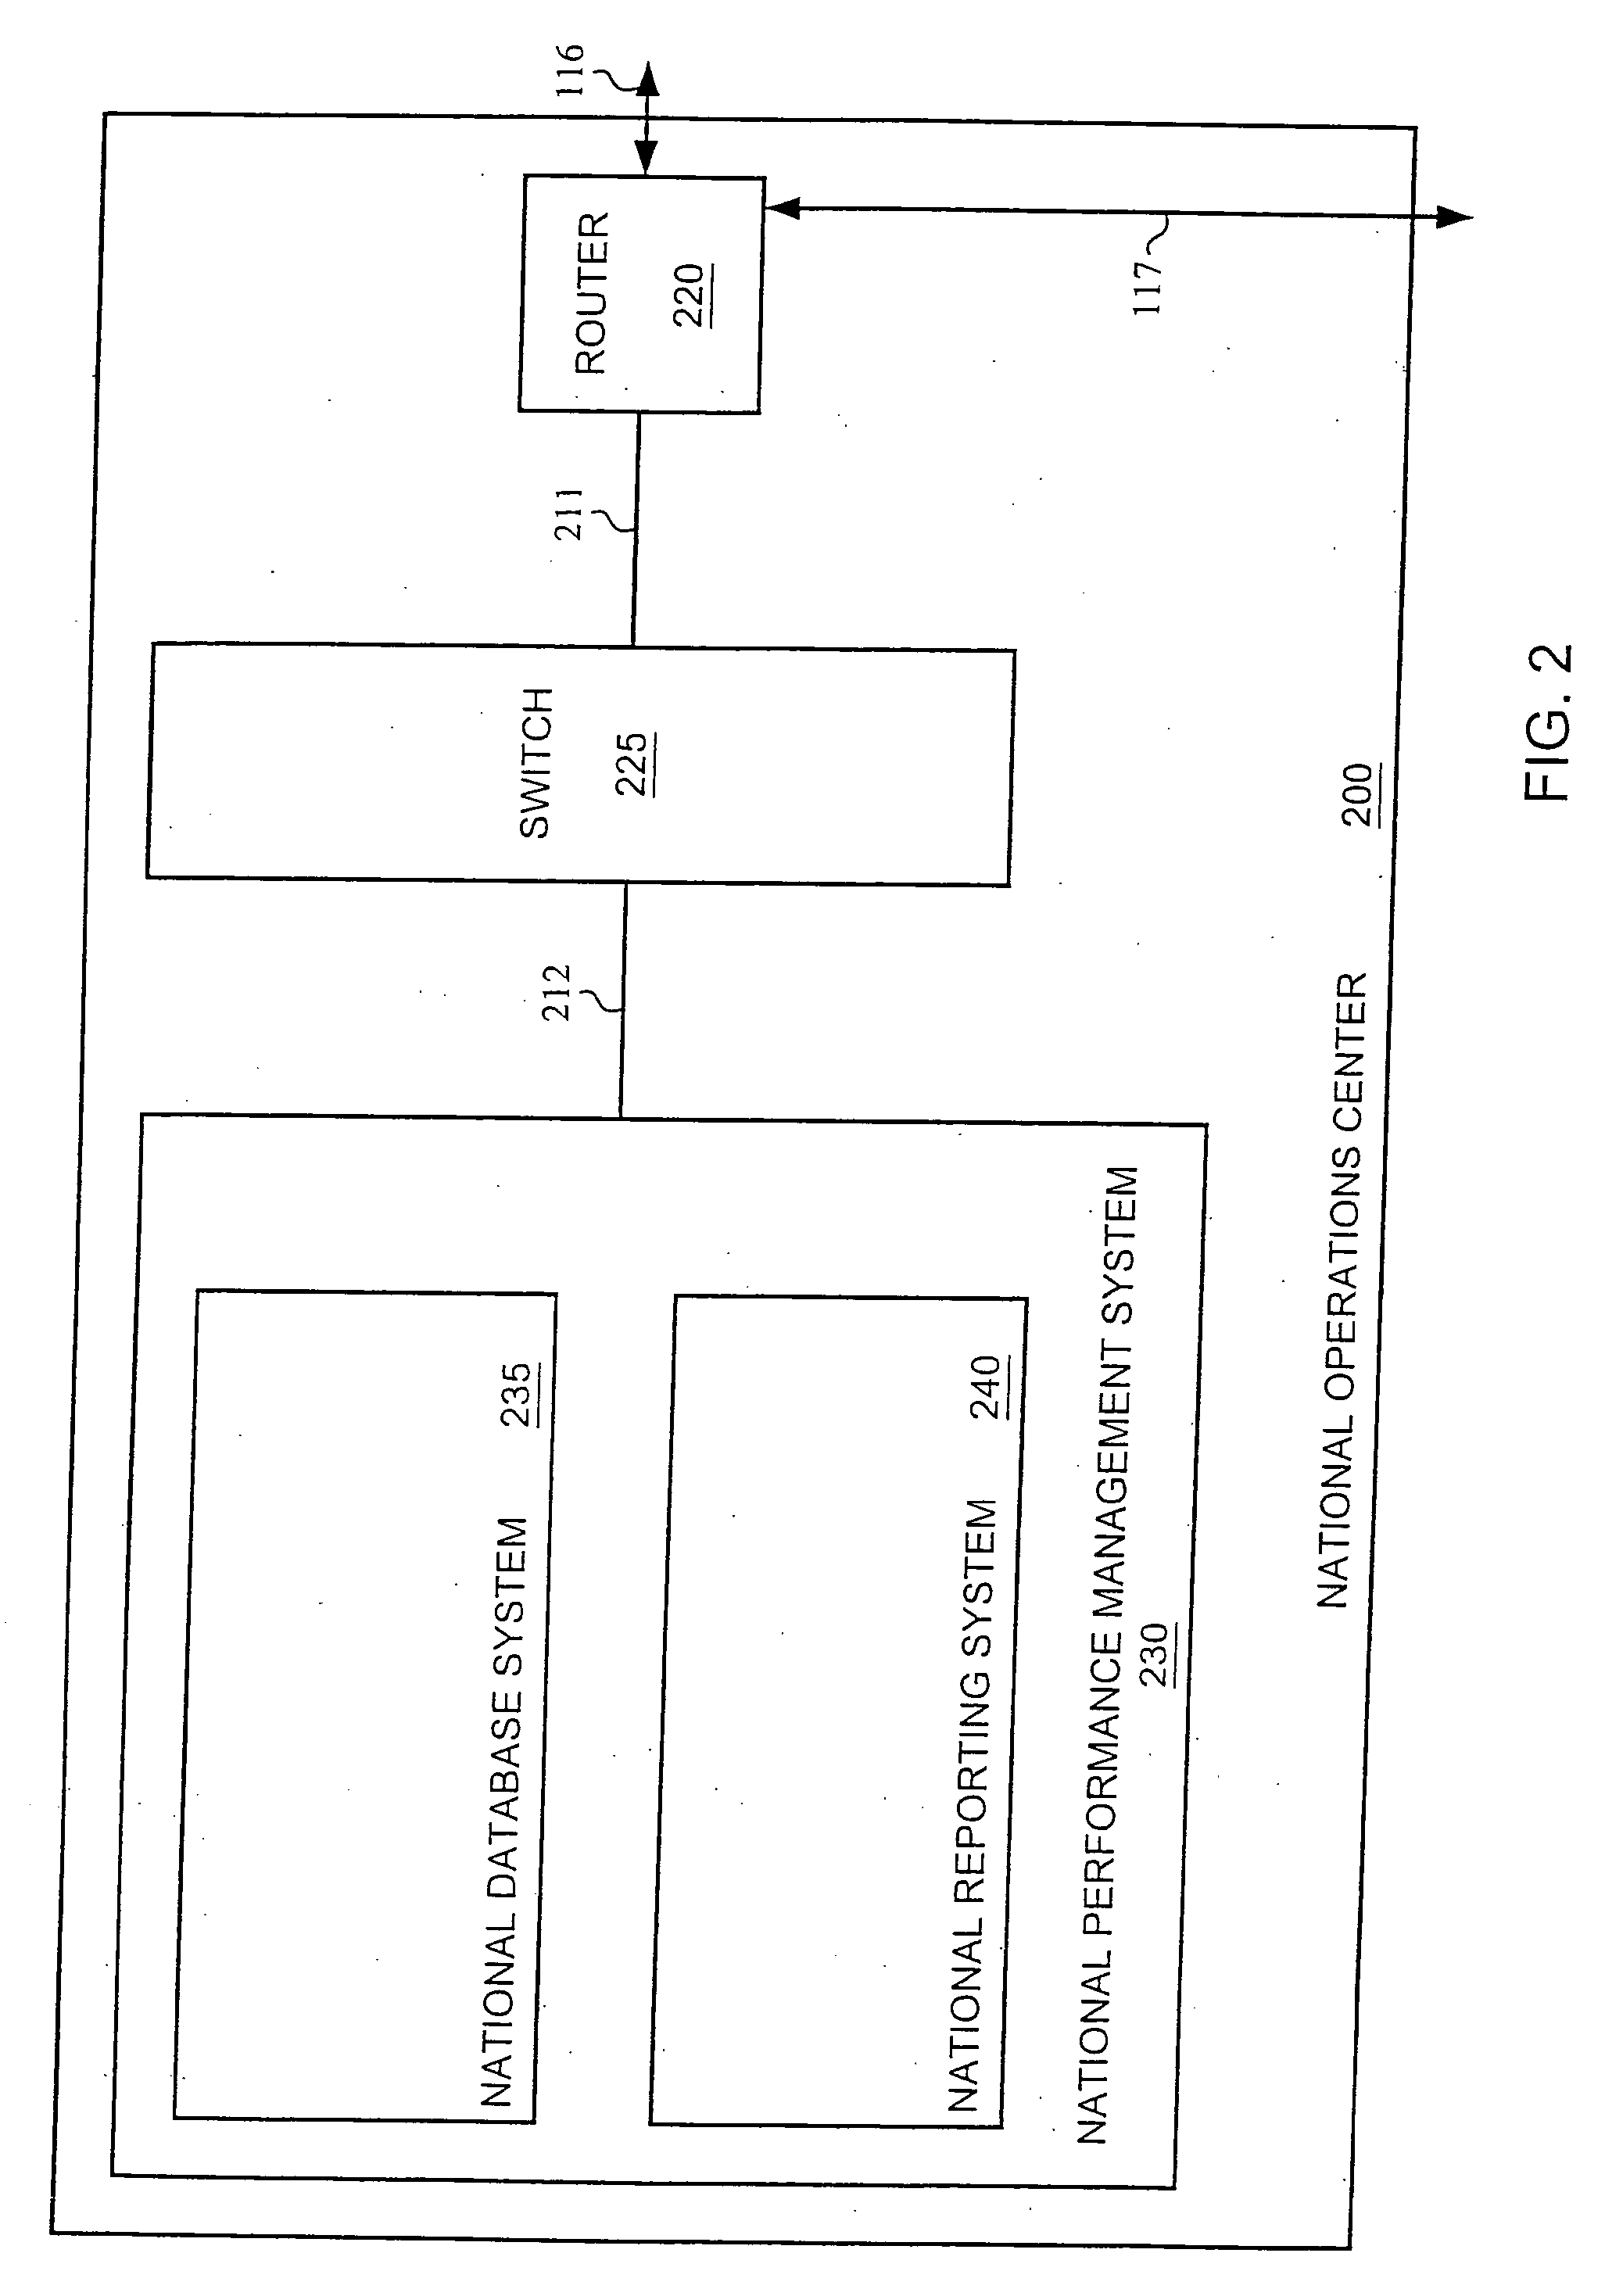 Credit transmission rate control for a wireless communication system